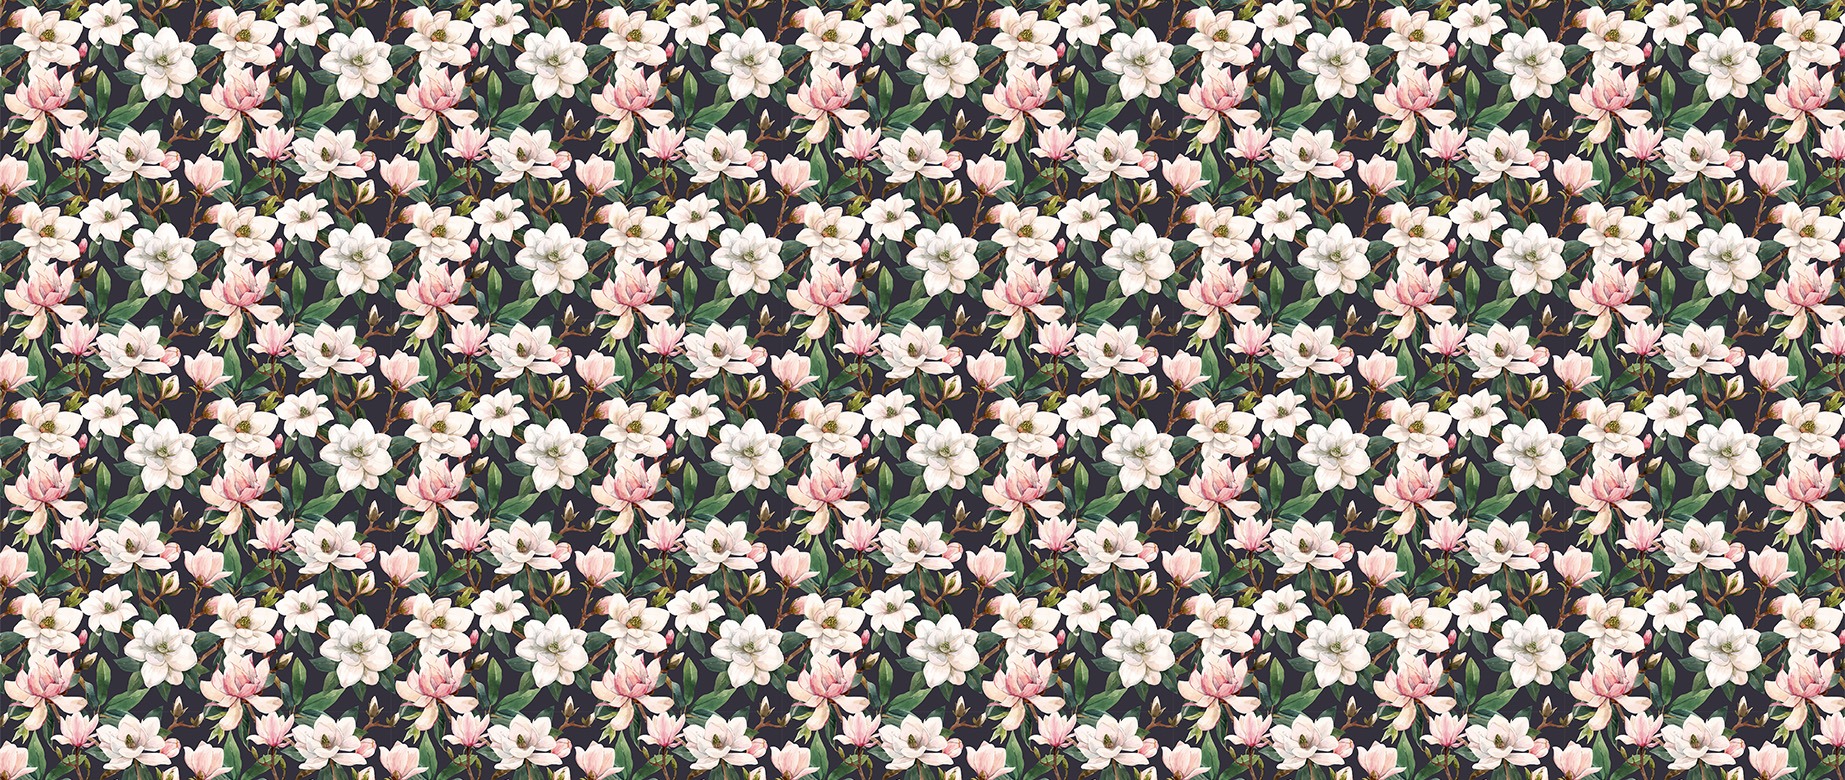 pink-white-magnolia-flowers-in-dark-wallpapers-full-wide-view